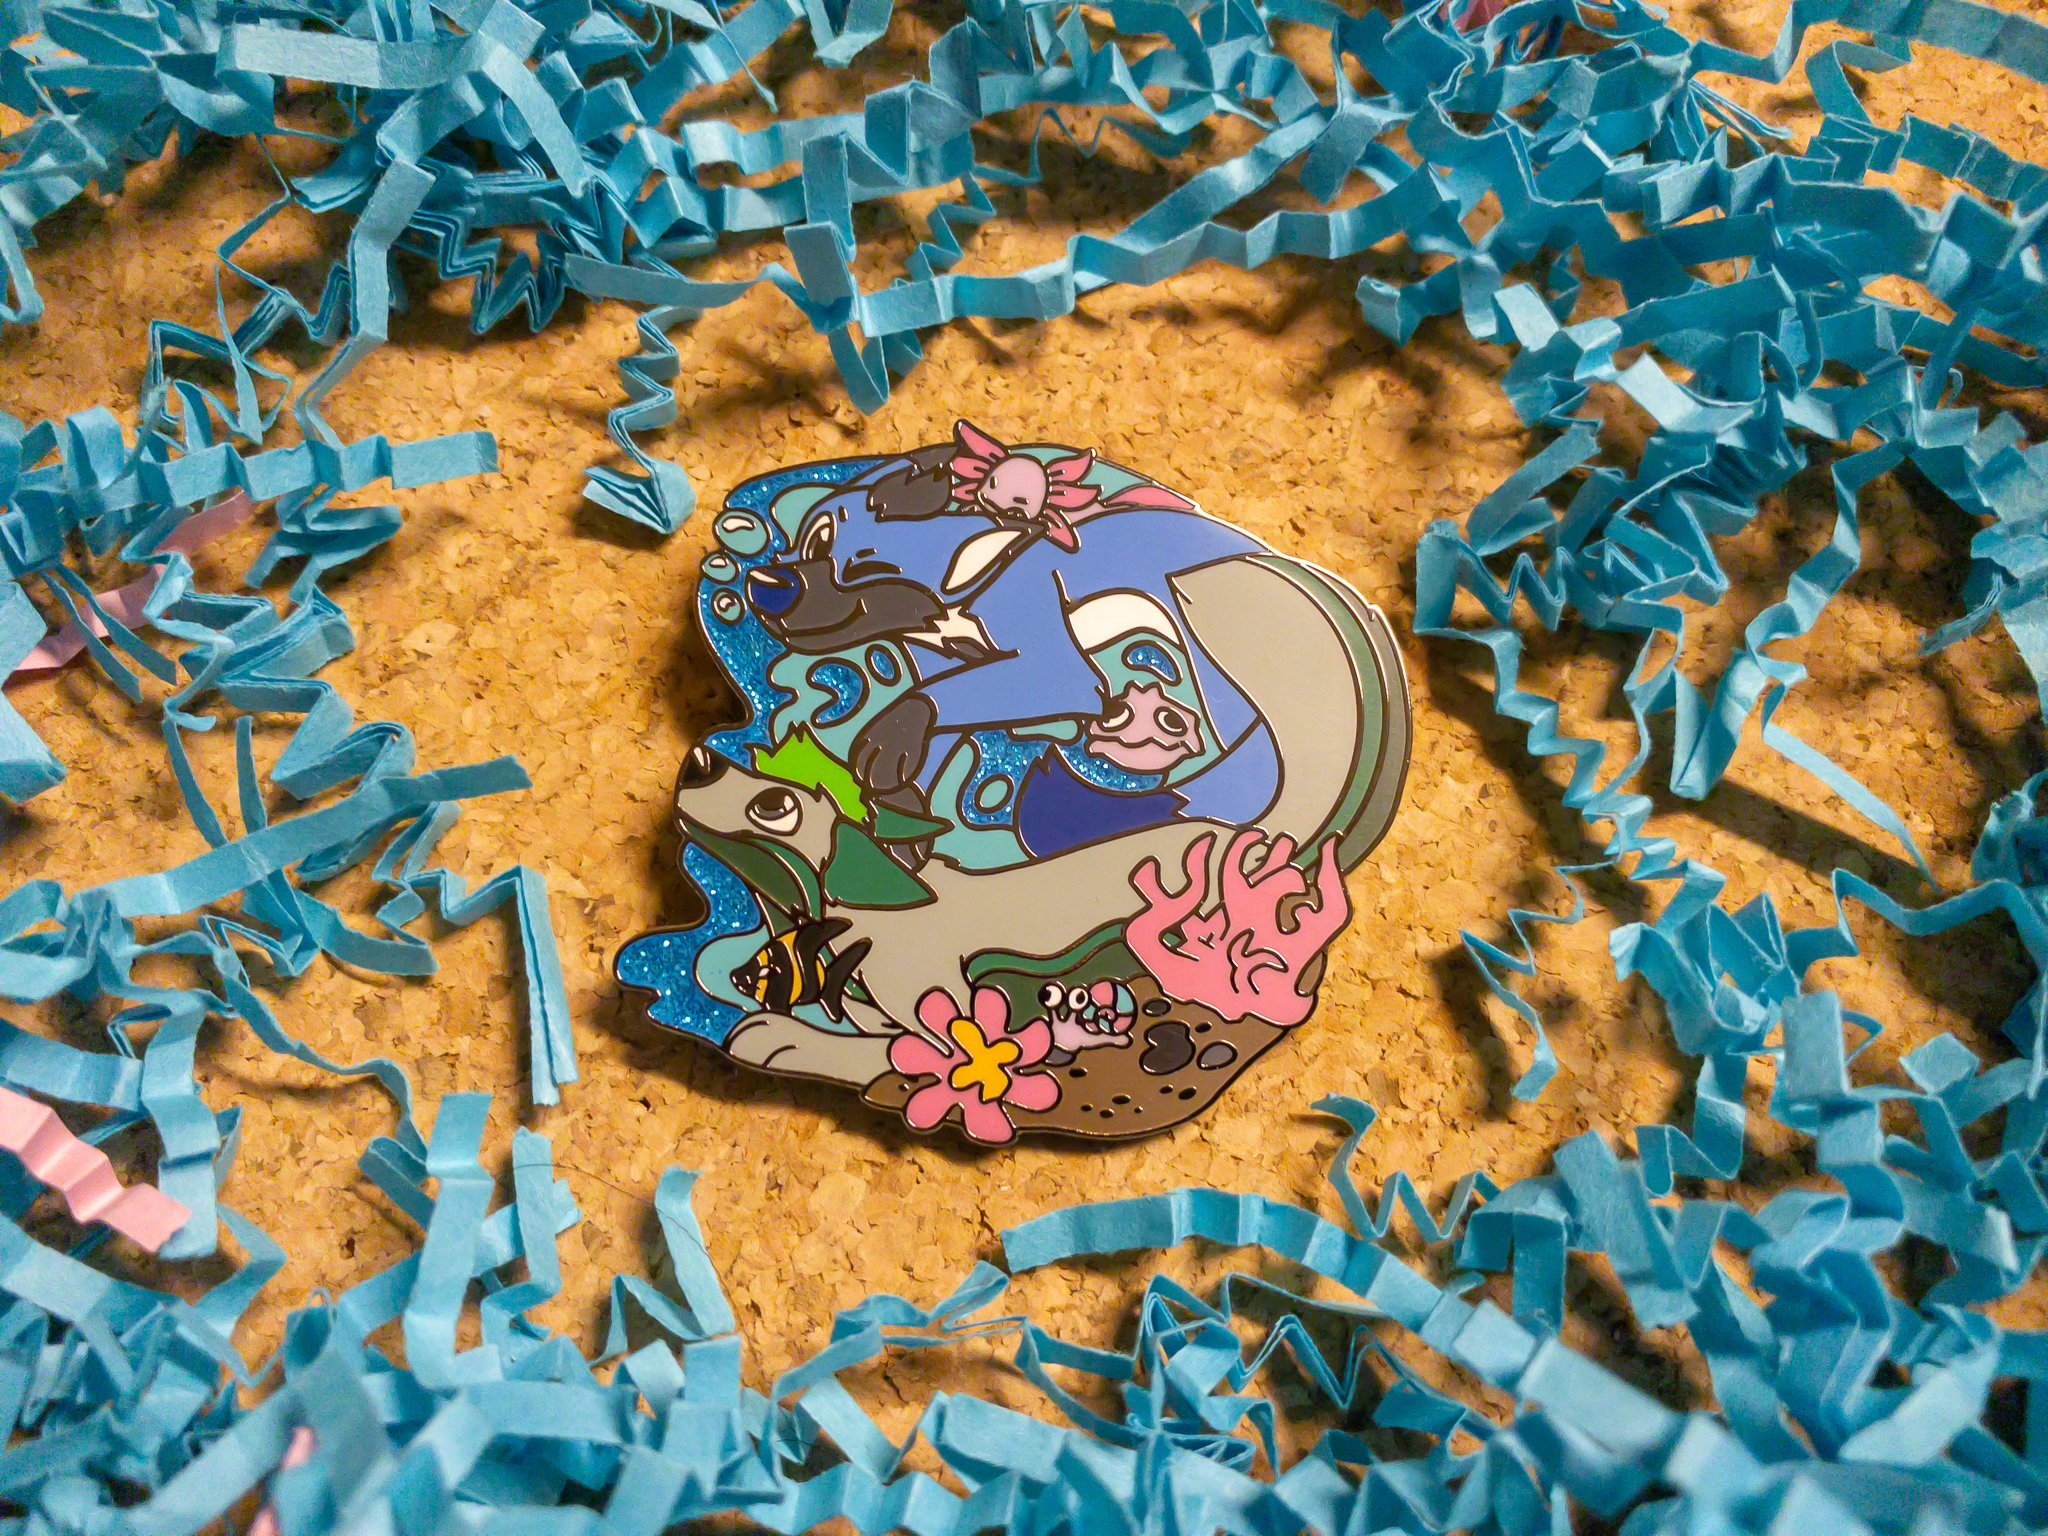 The pin itself, in all its glory!